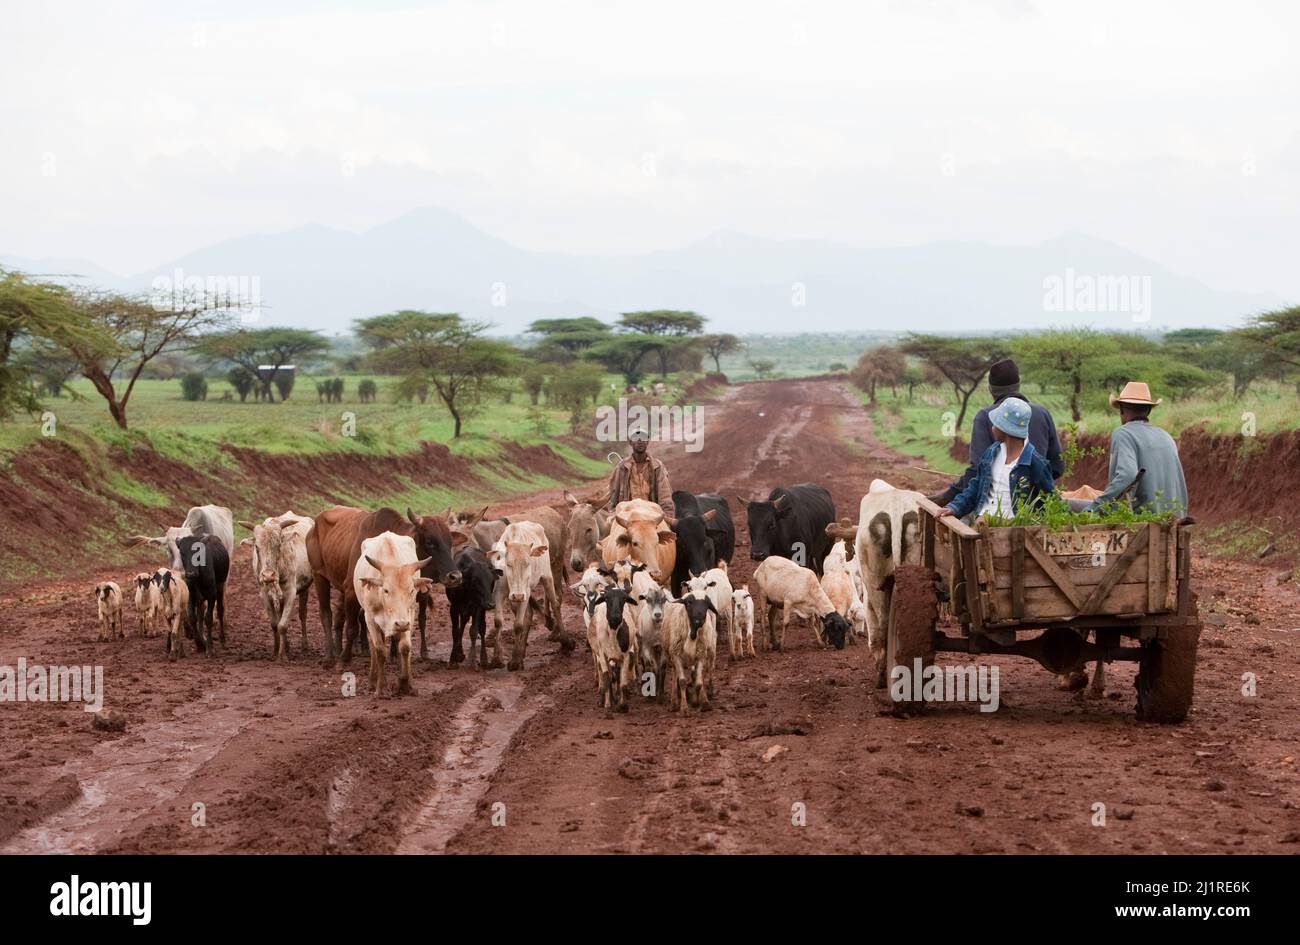 Cattle and ox-carts on the move. This main road on the outskirts of Meru, Kenya, has become impassable to cars after heavy rain. Stock Photo